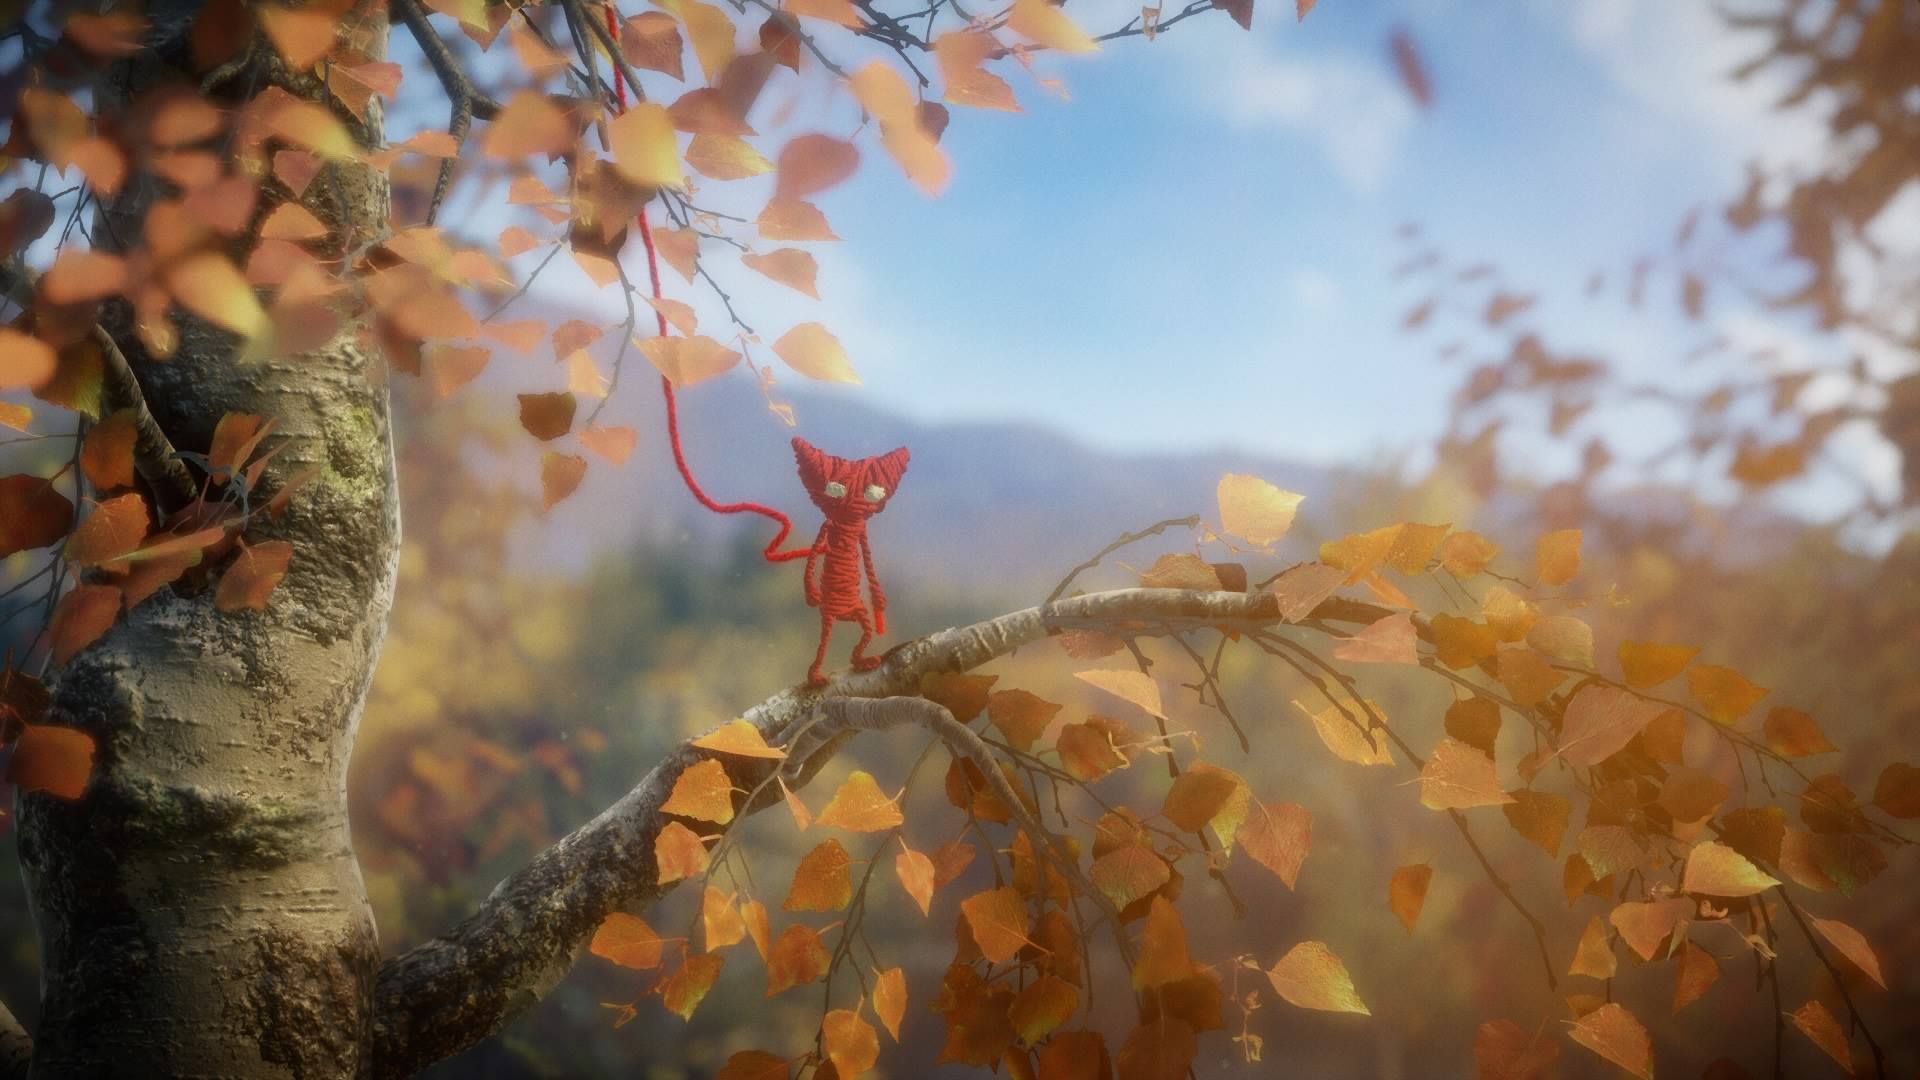 Unravel Wallpaper HD Unravel New Tab - HD Wallpapers & Backgrounds